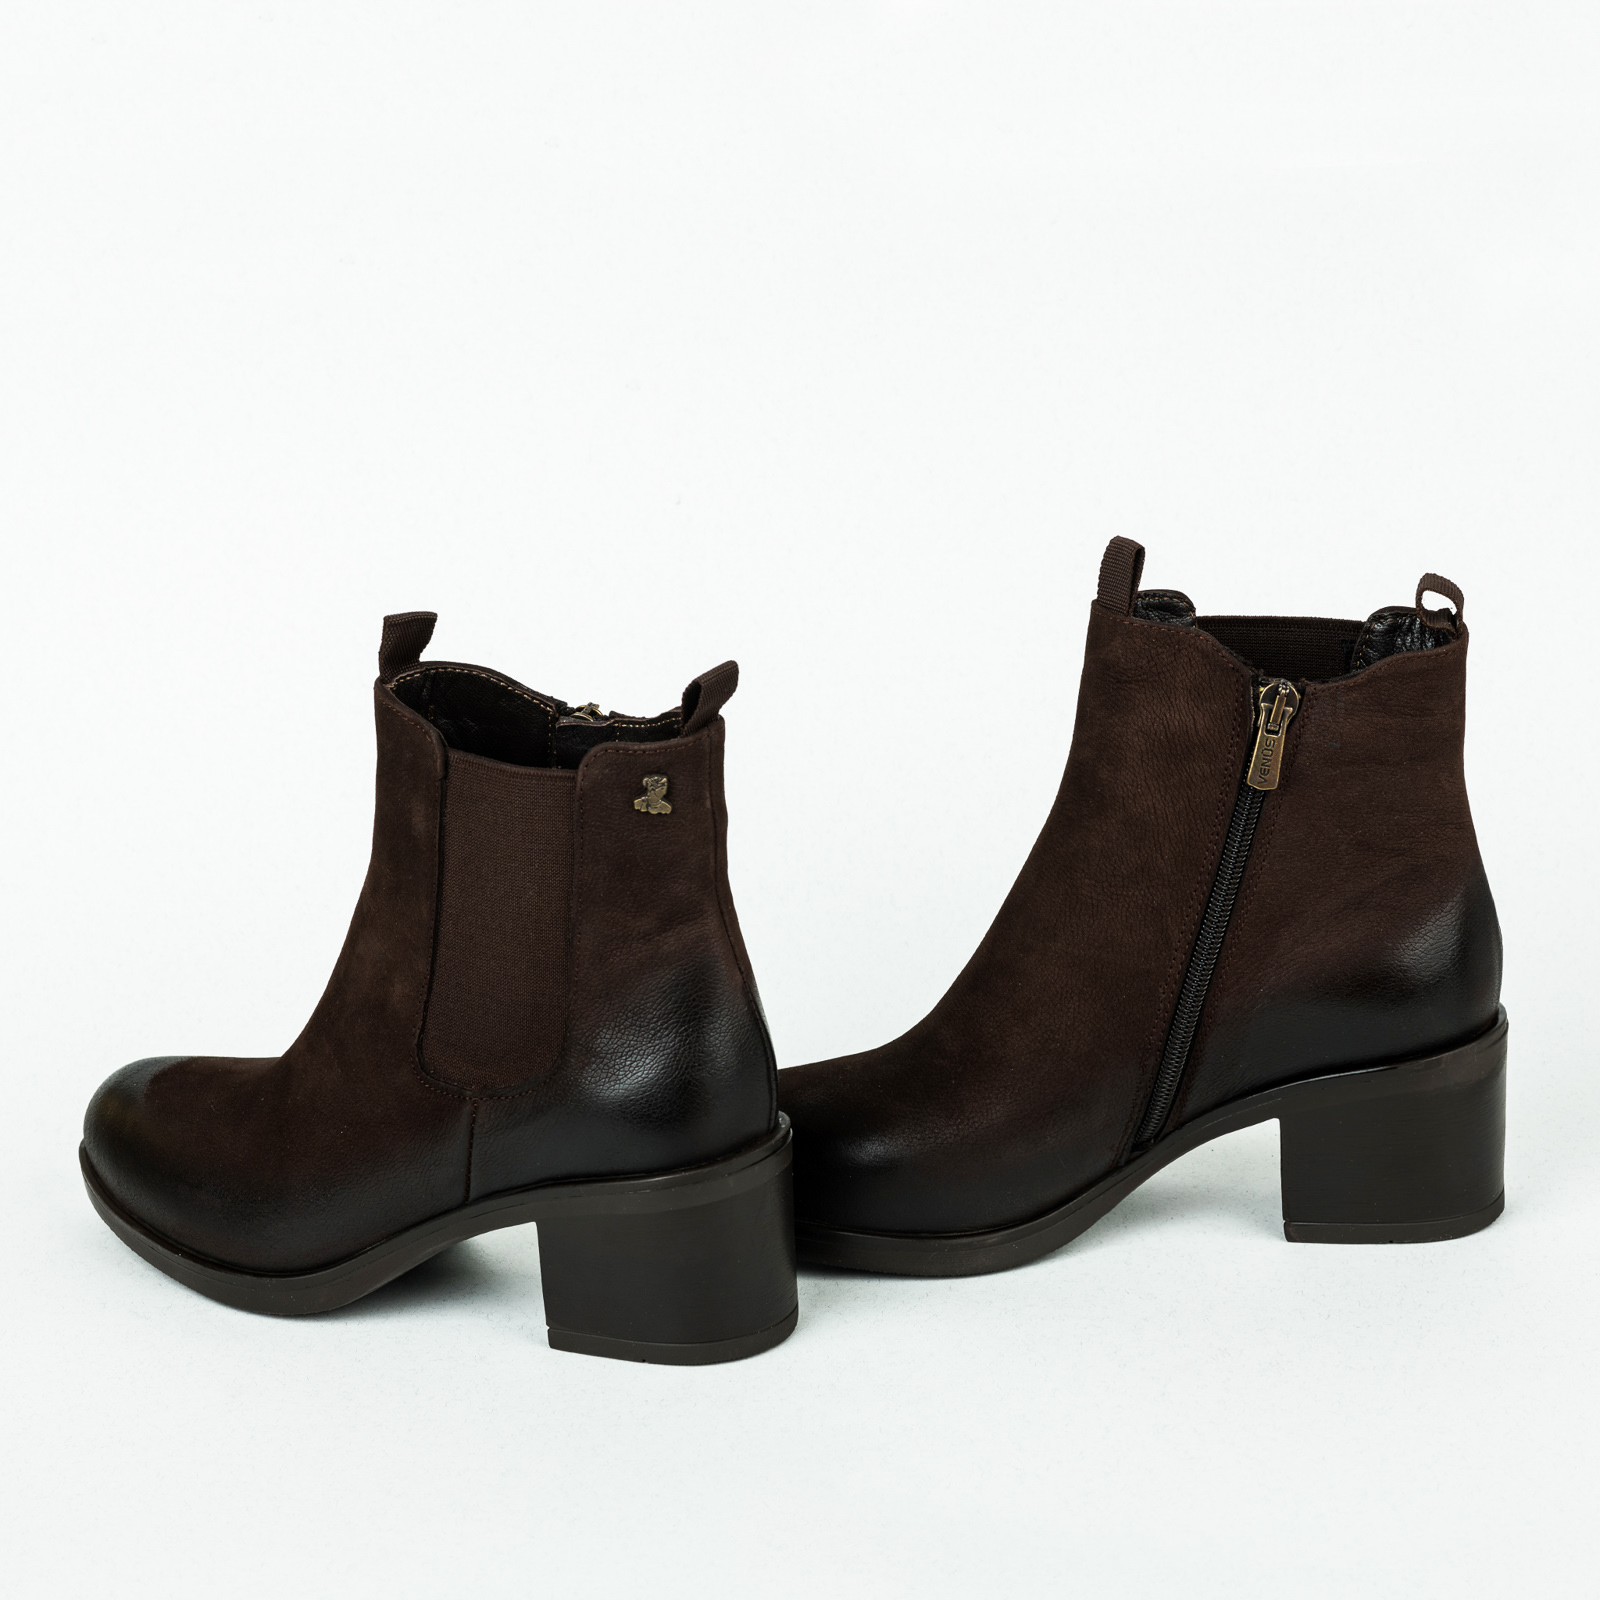 Leather ankle boots B067 - BROWN